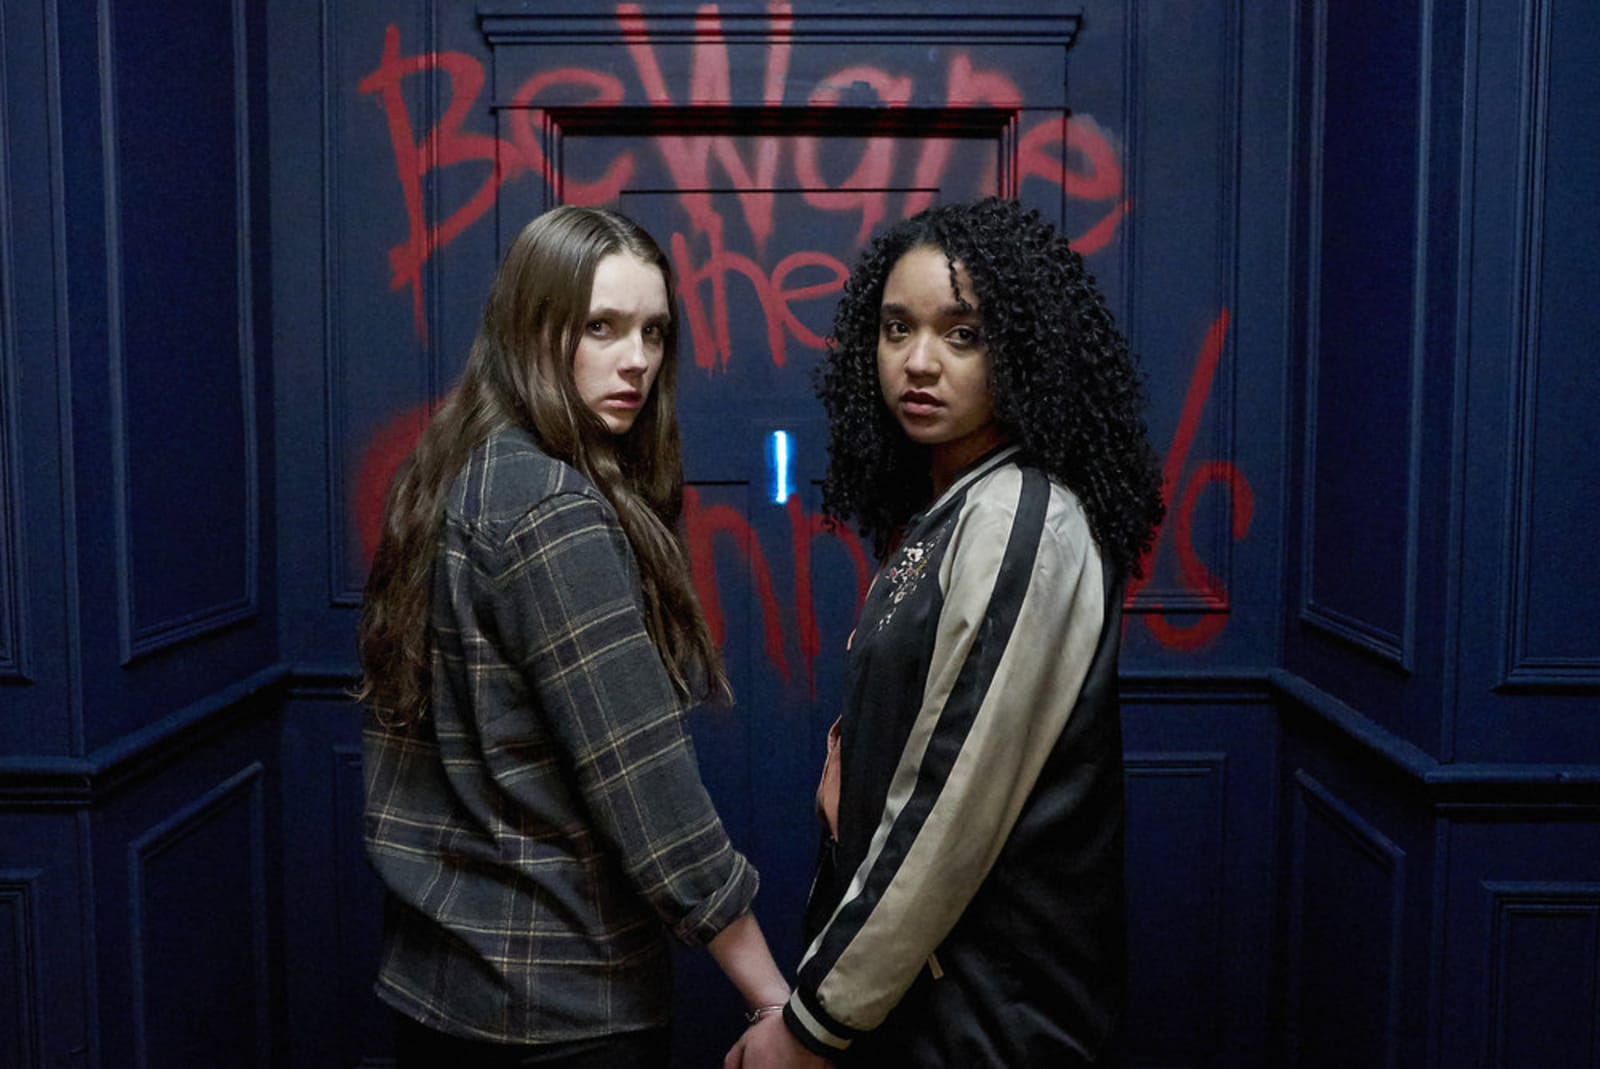 CHANNEL ZERO: NO END HOUSE -- "The Exit" Episode 110 -- Pictured: (l-r) Amy Forsyth as Margot, Aisha Dee as Jules -- (Photo by: Allen Fraser/Syfy)